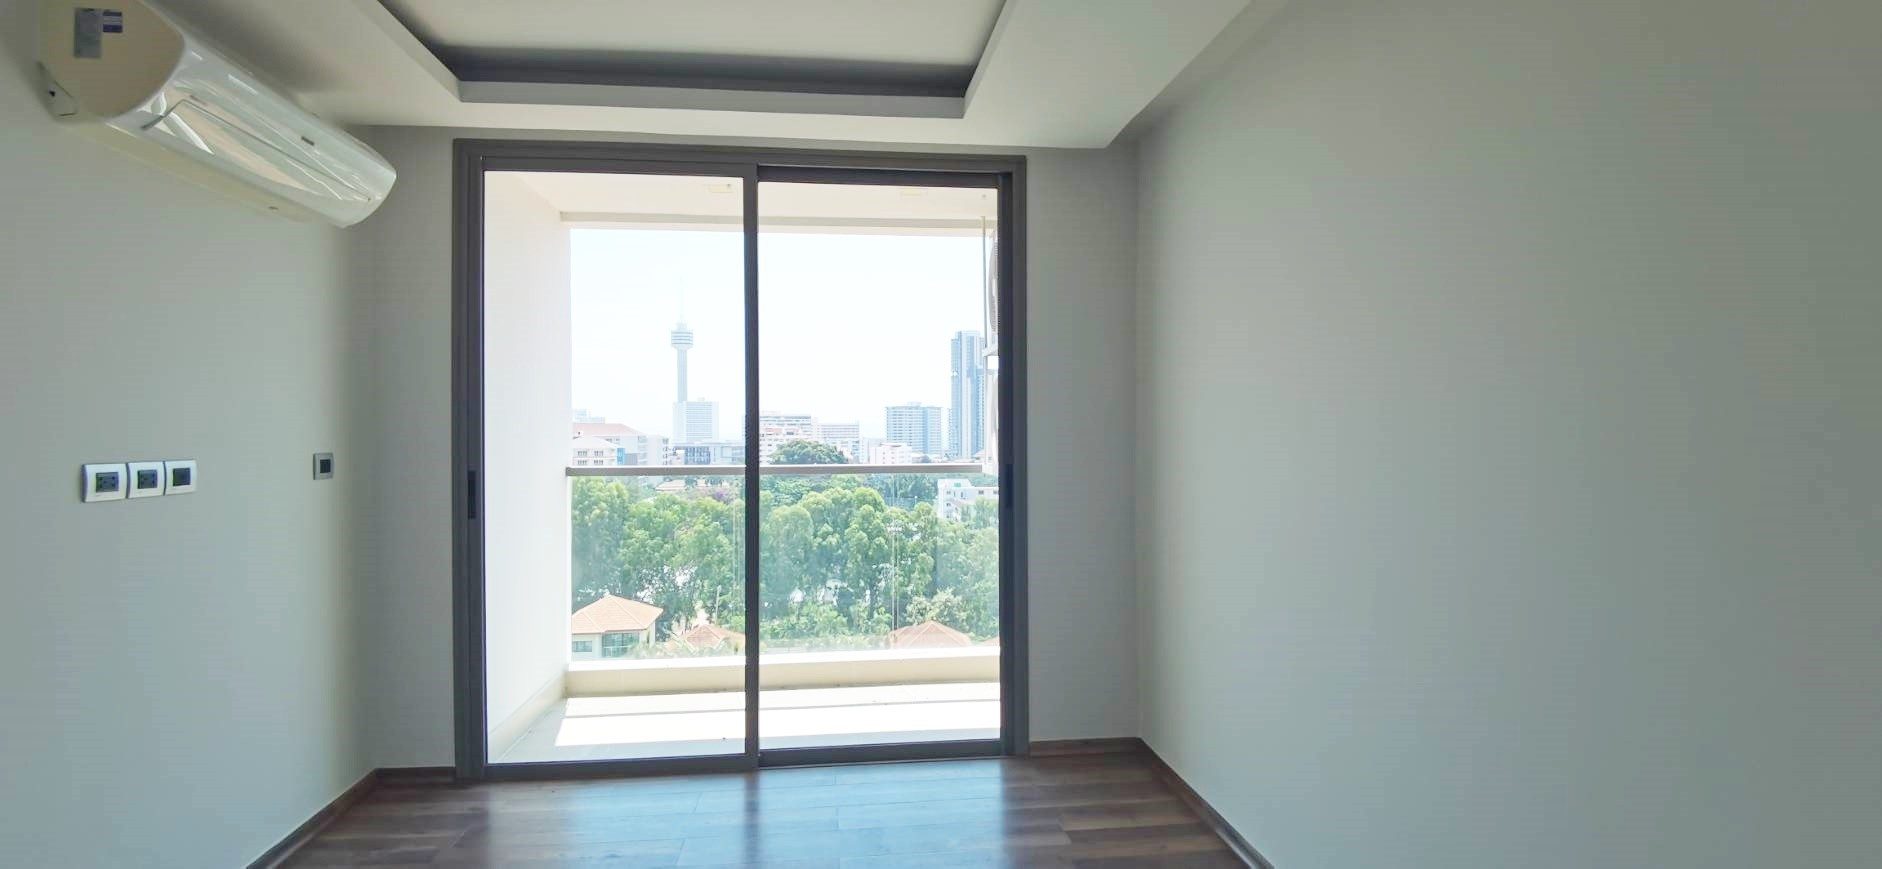 PBRE Asia Pacific Co., Ltd Agency's 1Bedroom Condo at The Peak Towers for Sale 9